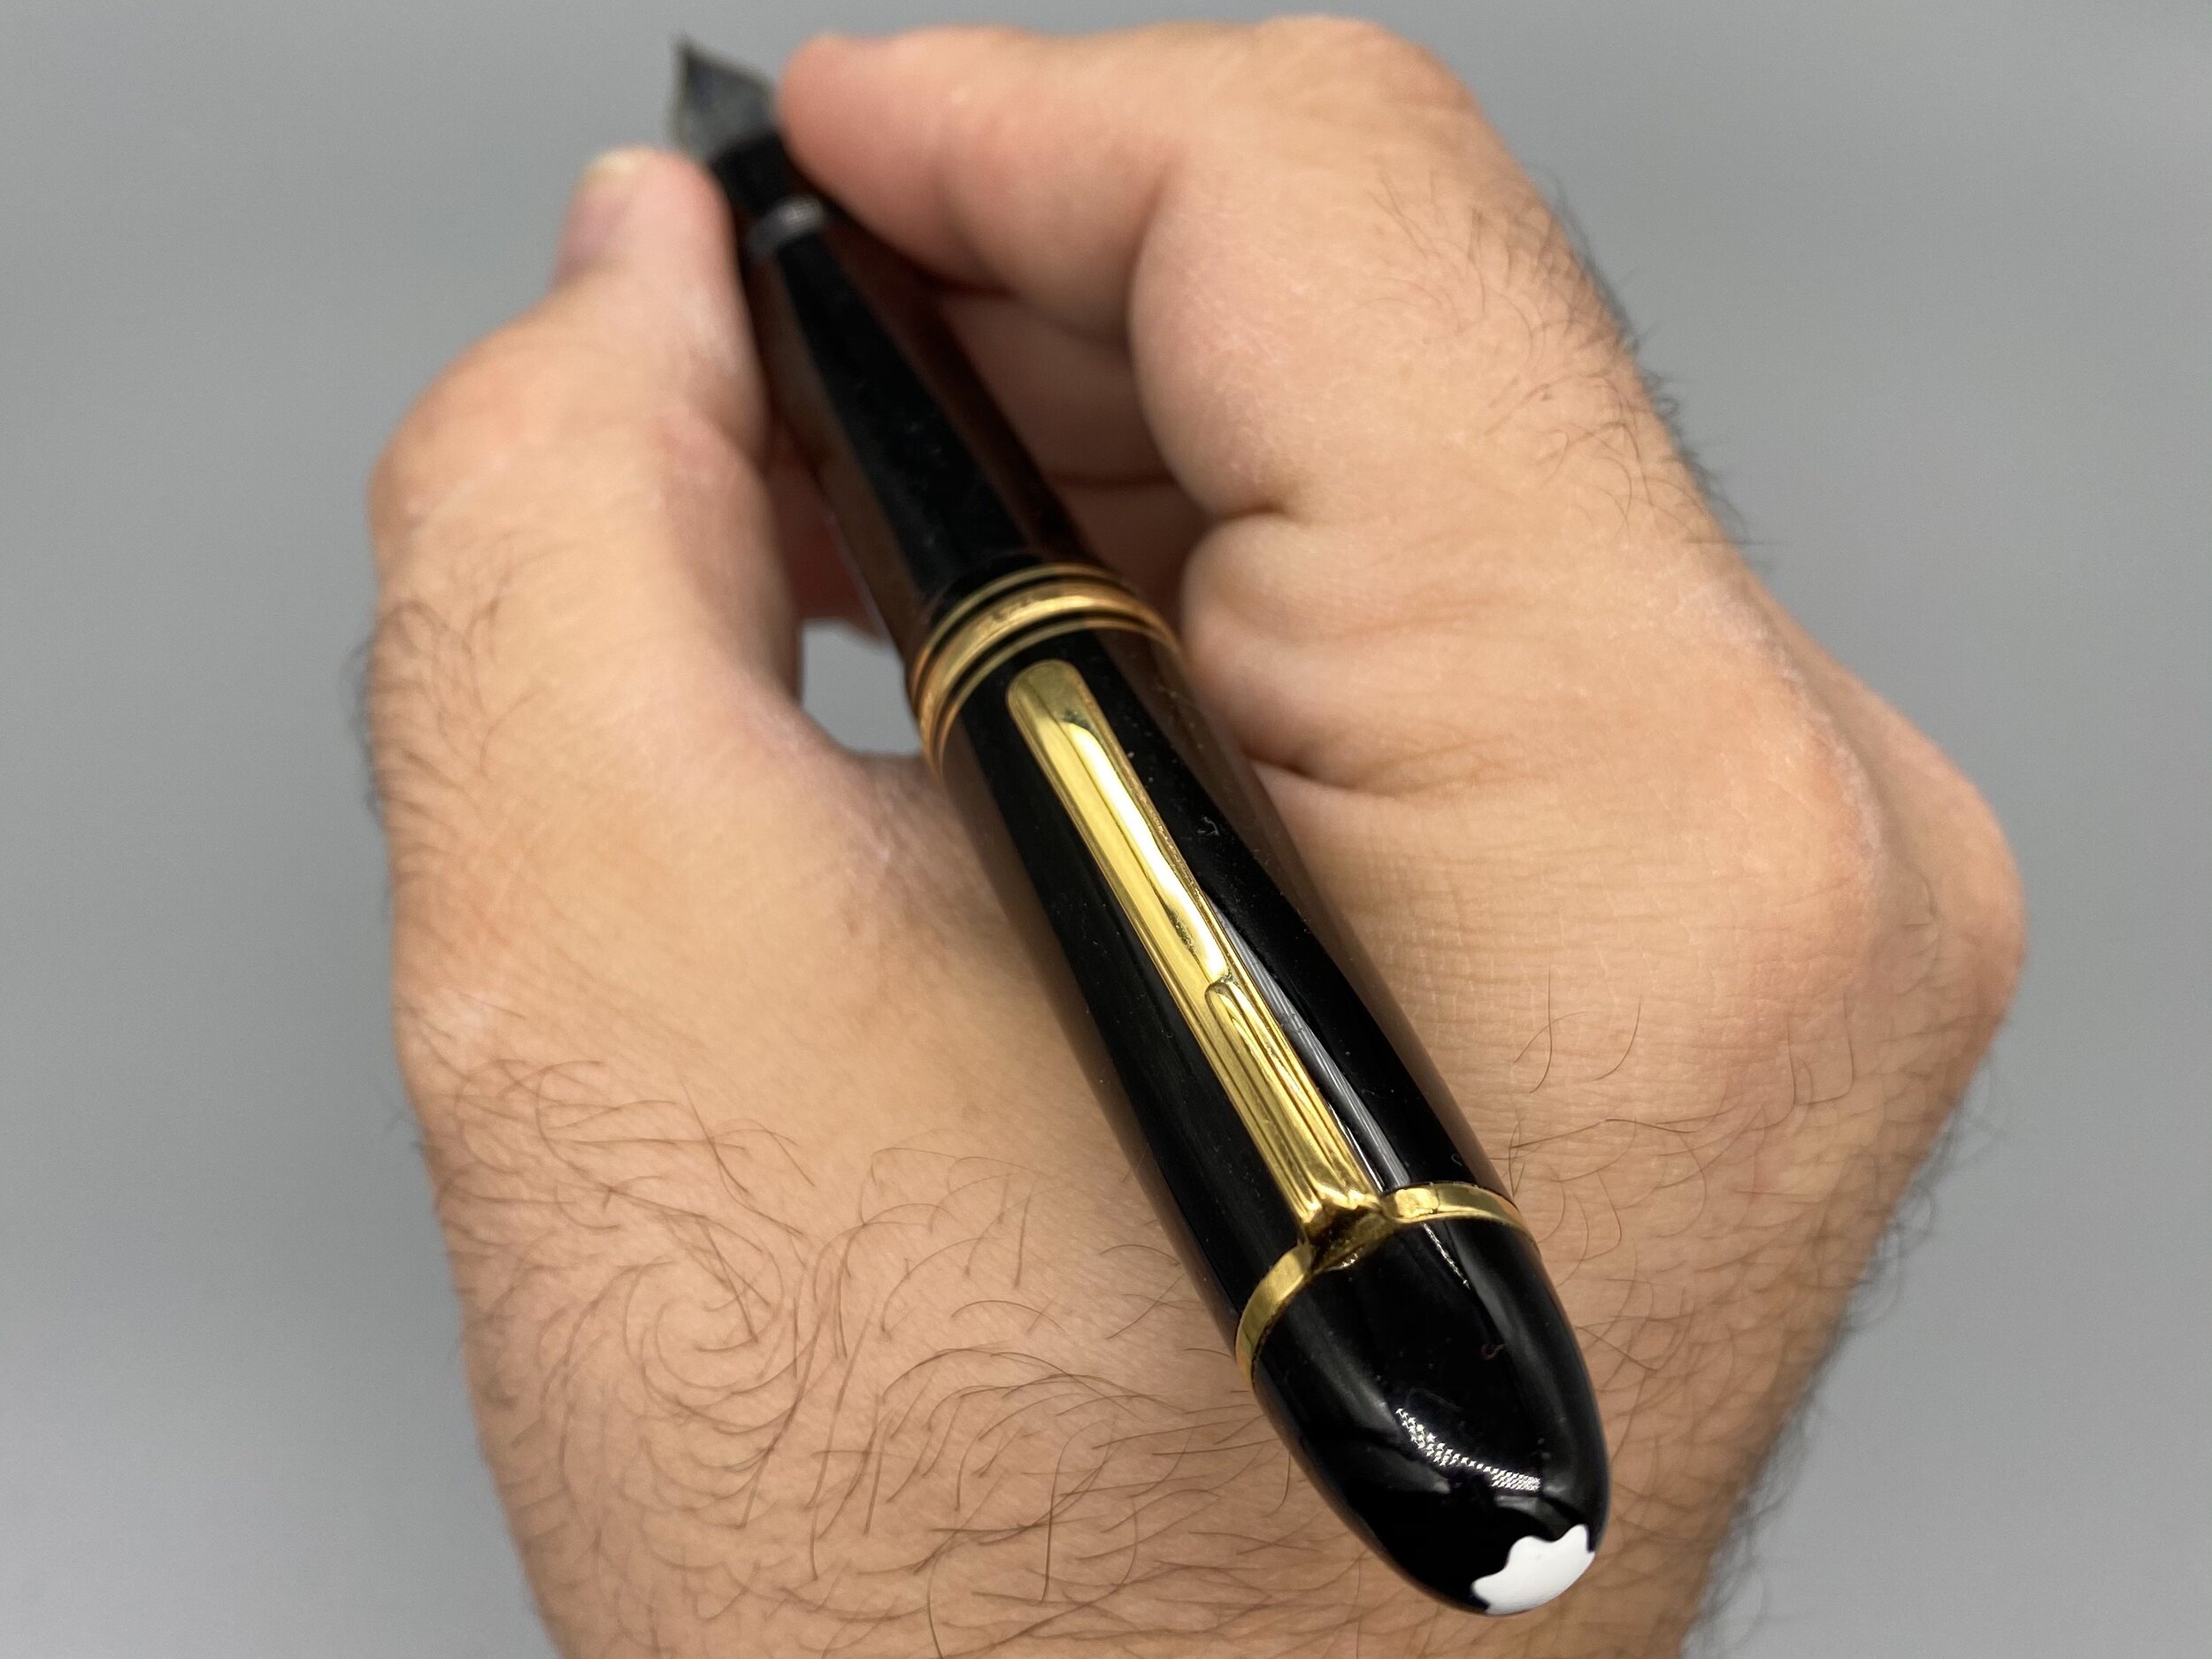 Knogle overskæg Bug Oversized and Never Far From Mind: My Look at the Montblanc Meisterstuck  149 — Penquisition